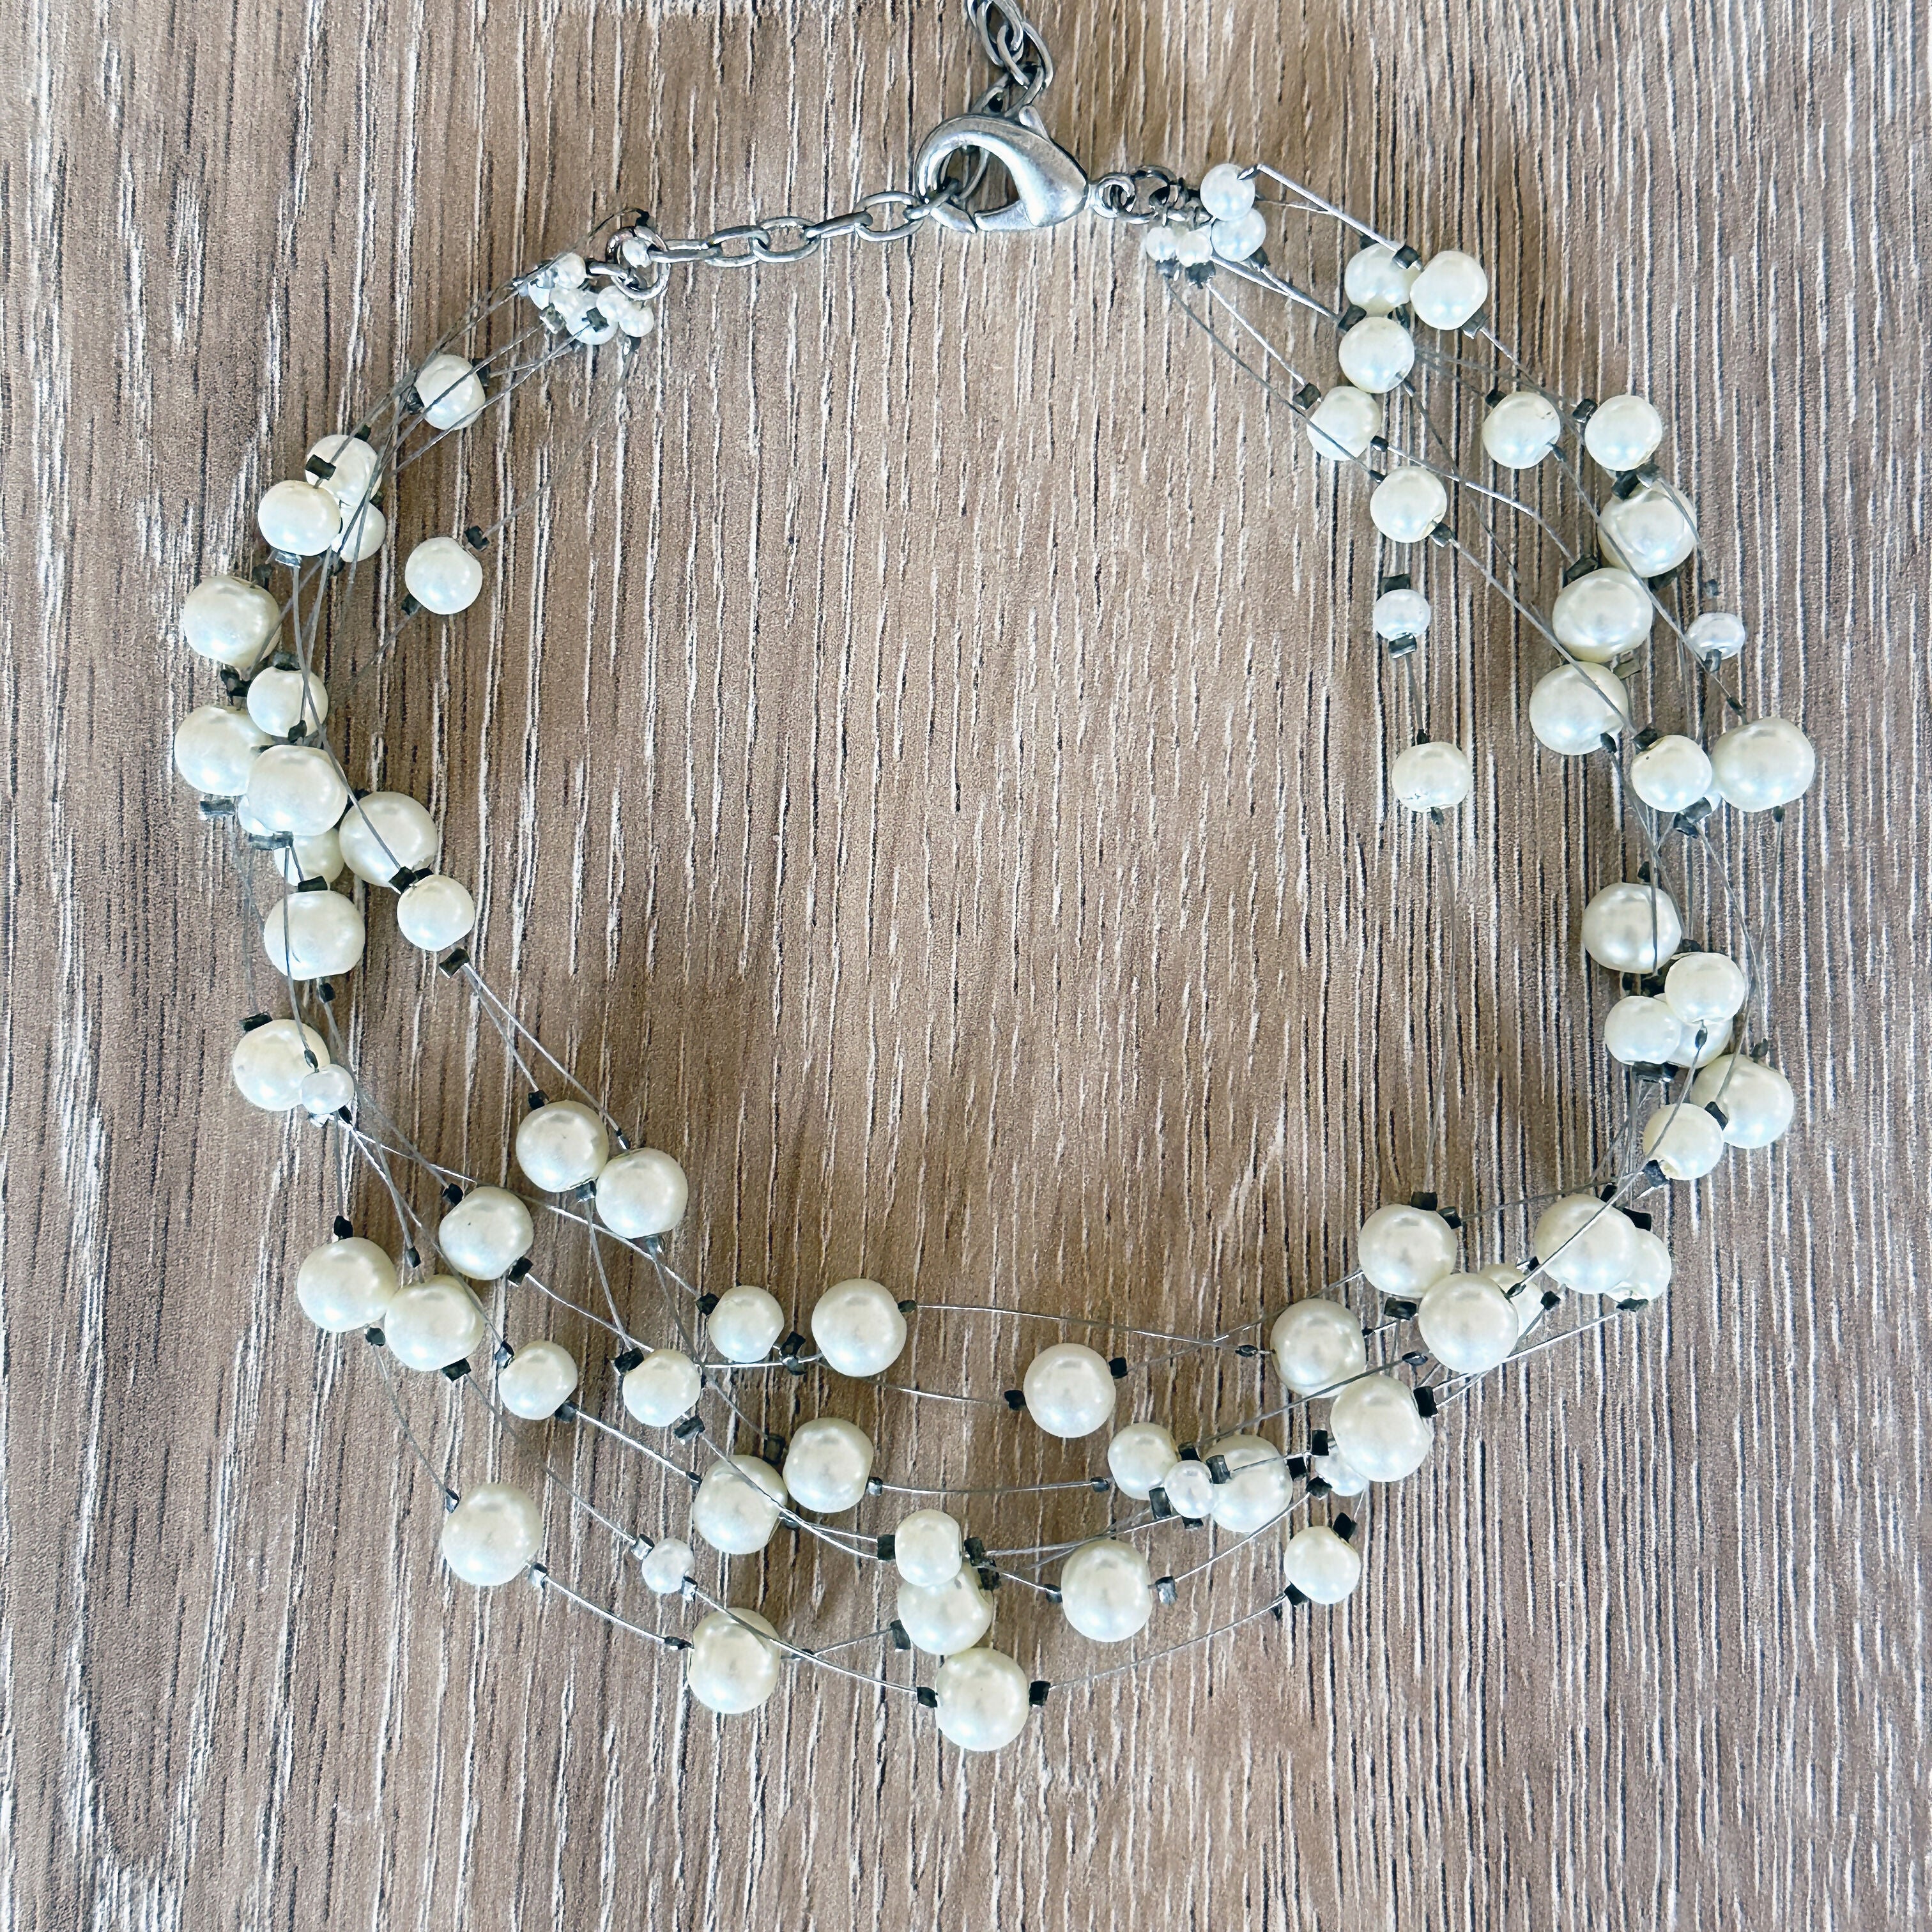 The ALL WHITE collection: Edgy Pearls!